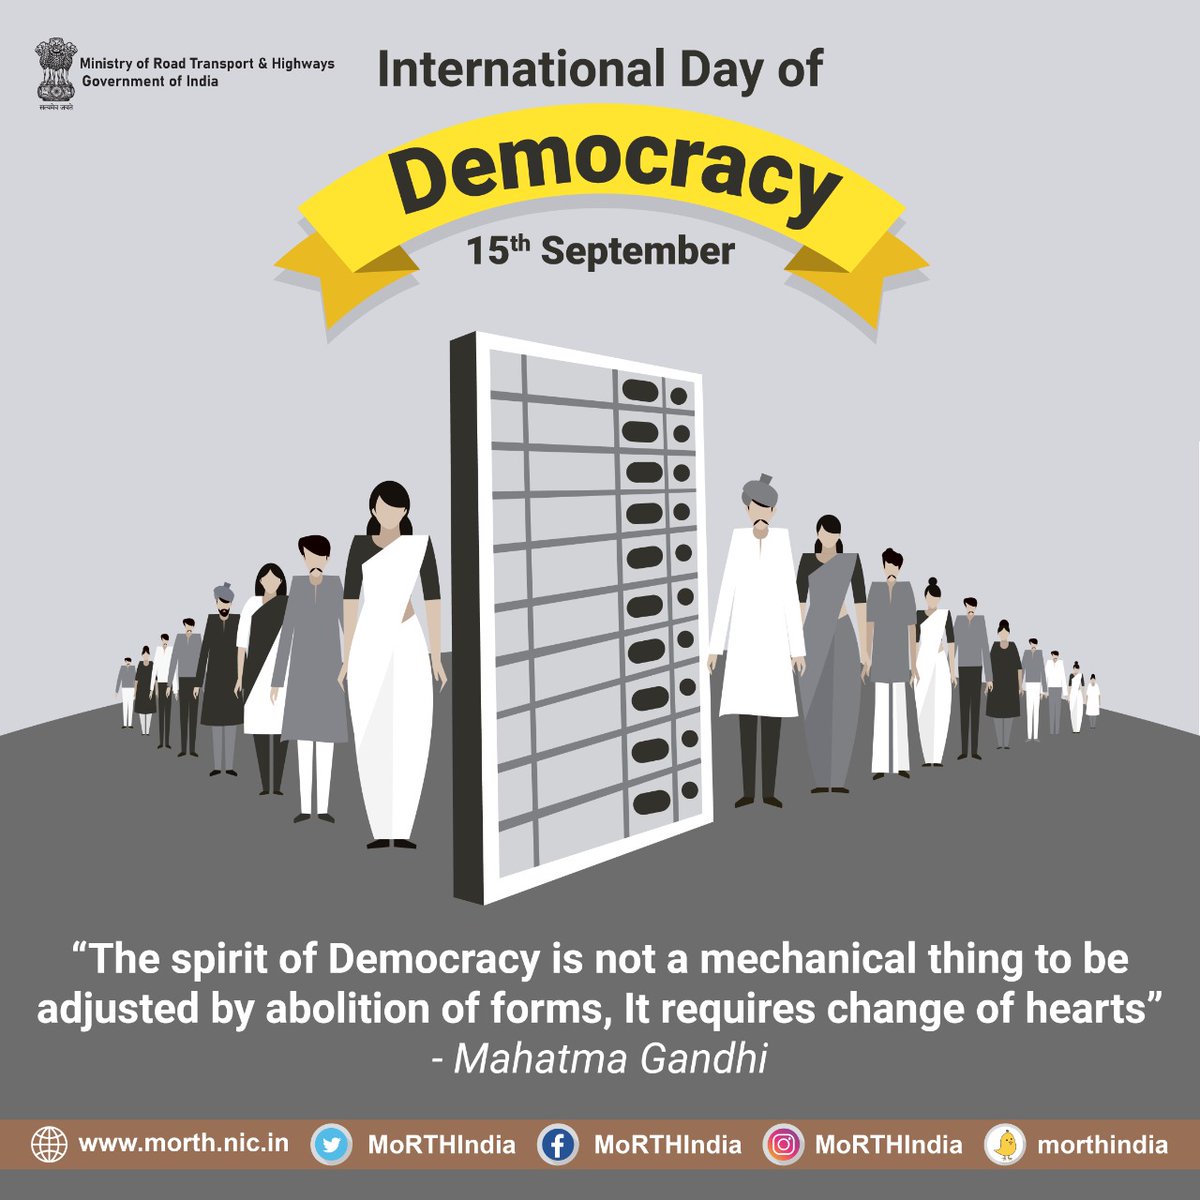 Today, let us all celebrate the principles upon which democracy rests, including equal representation & freedom of participation and pledge not to take our democracy for granted.
#WorldDemocracyDay